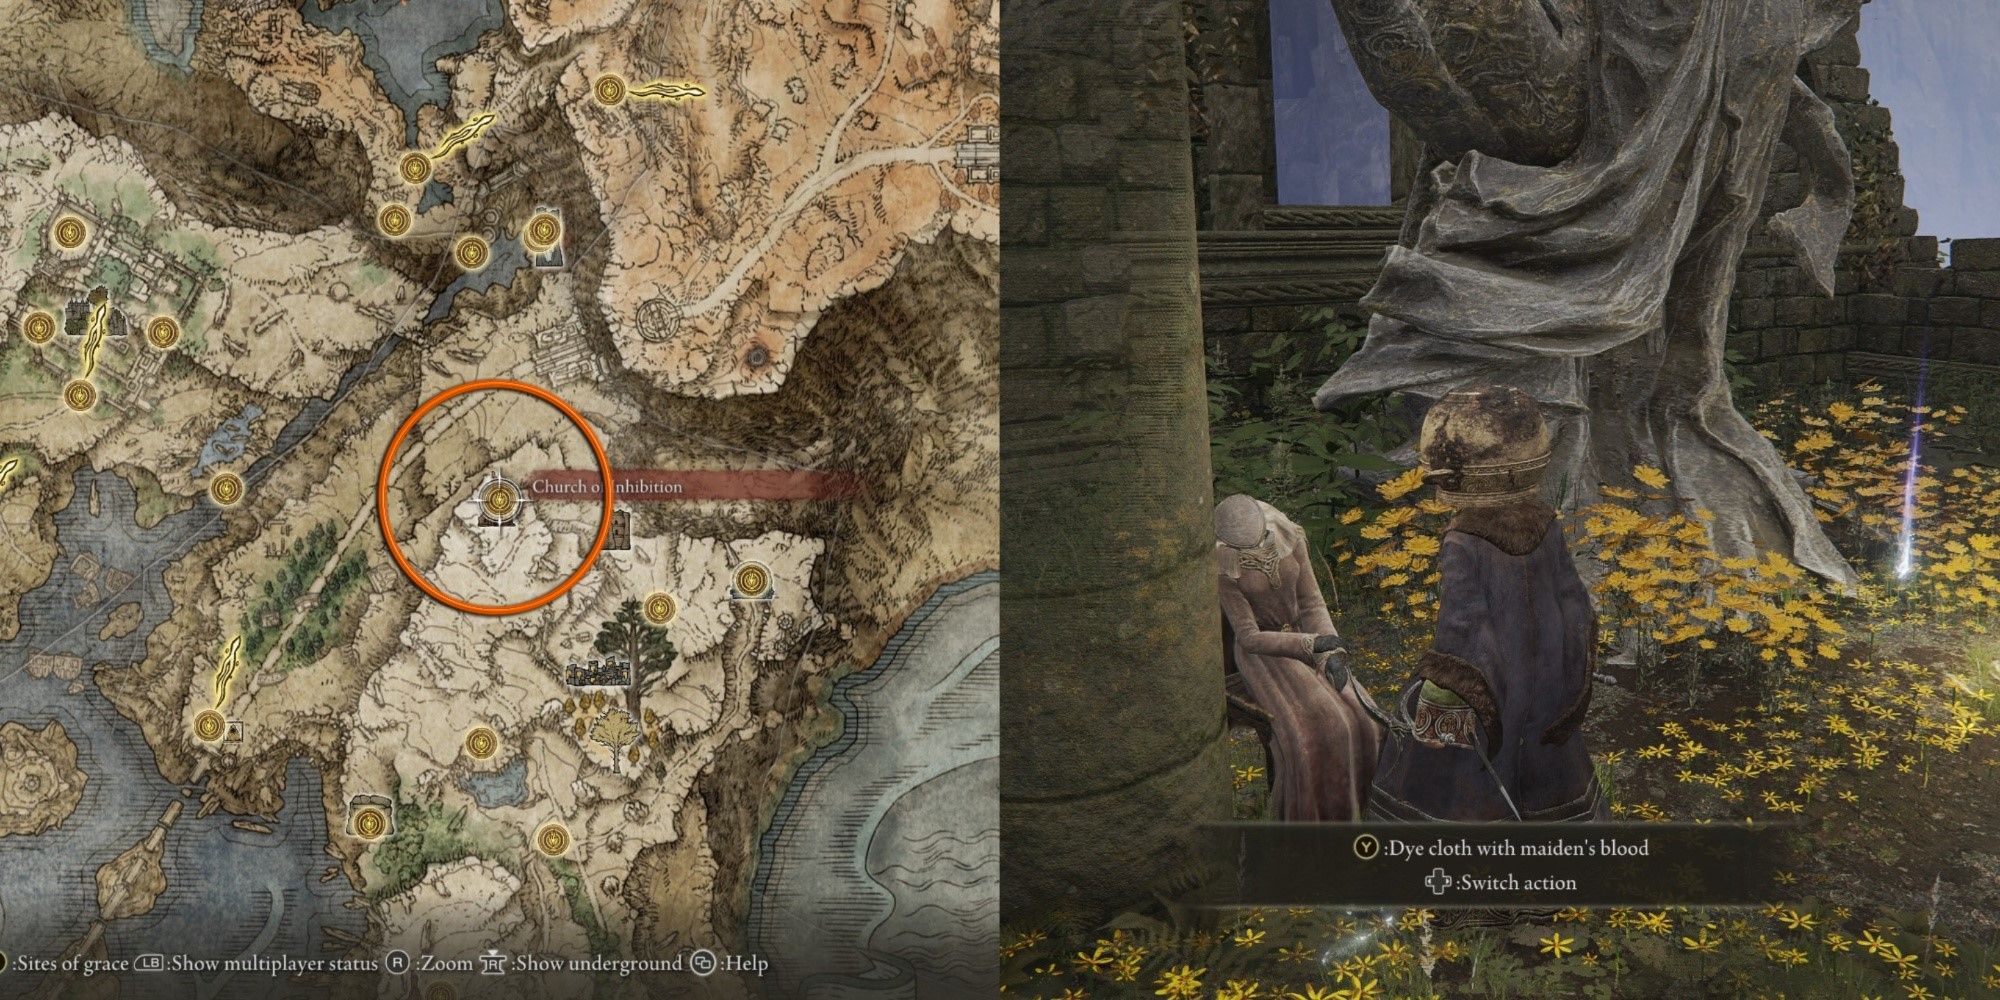 Collage of Church of Inhibition map location and Jarhead-wearing Tarnished finding dead maiden in Elden Ring